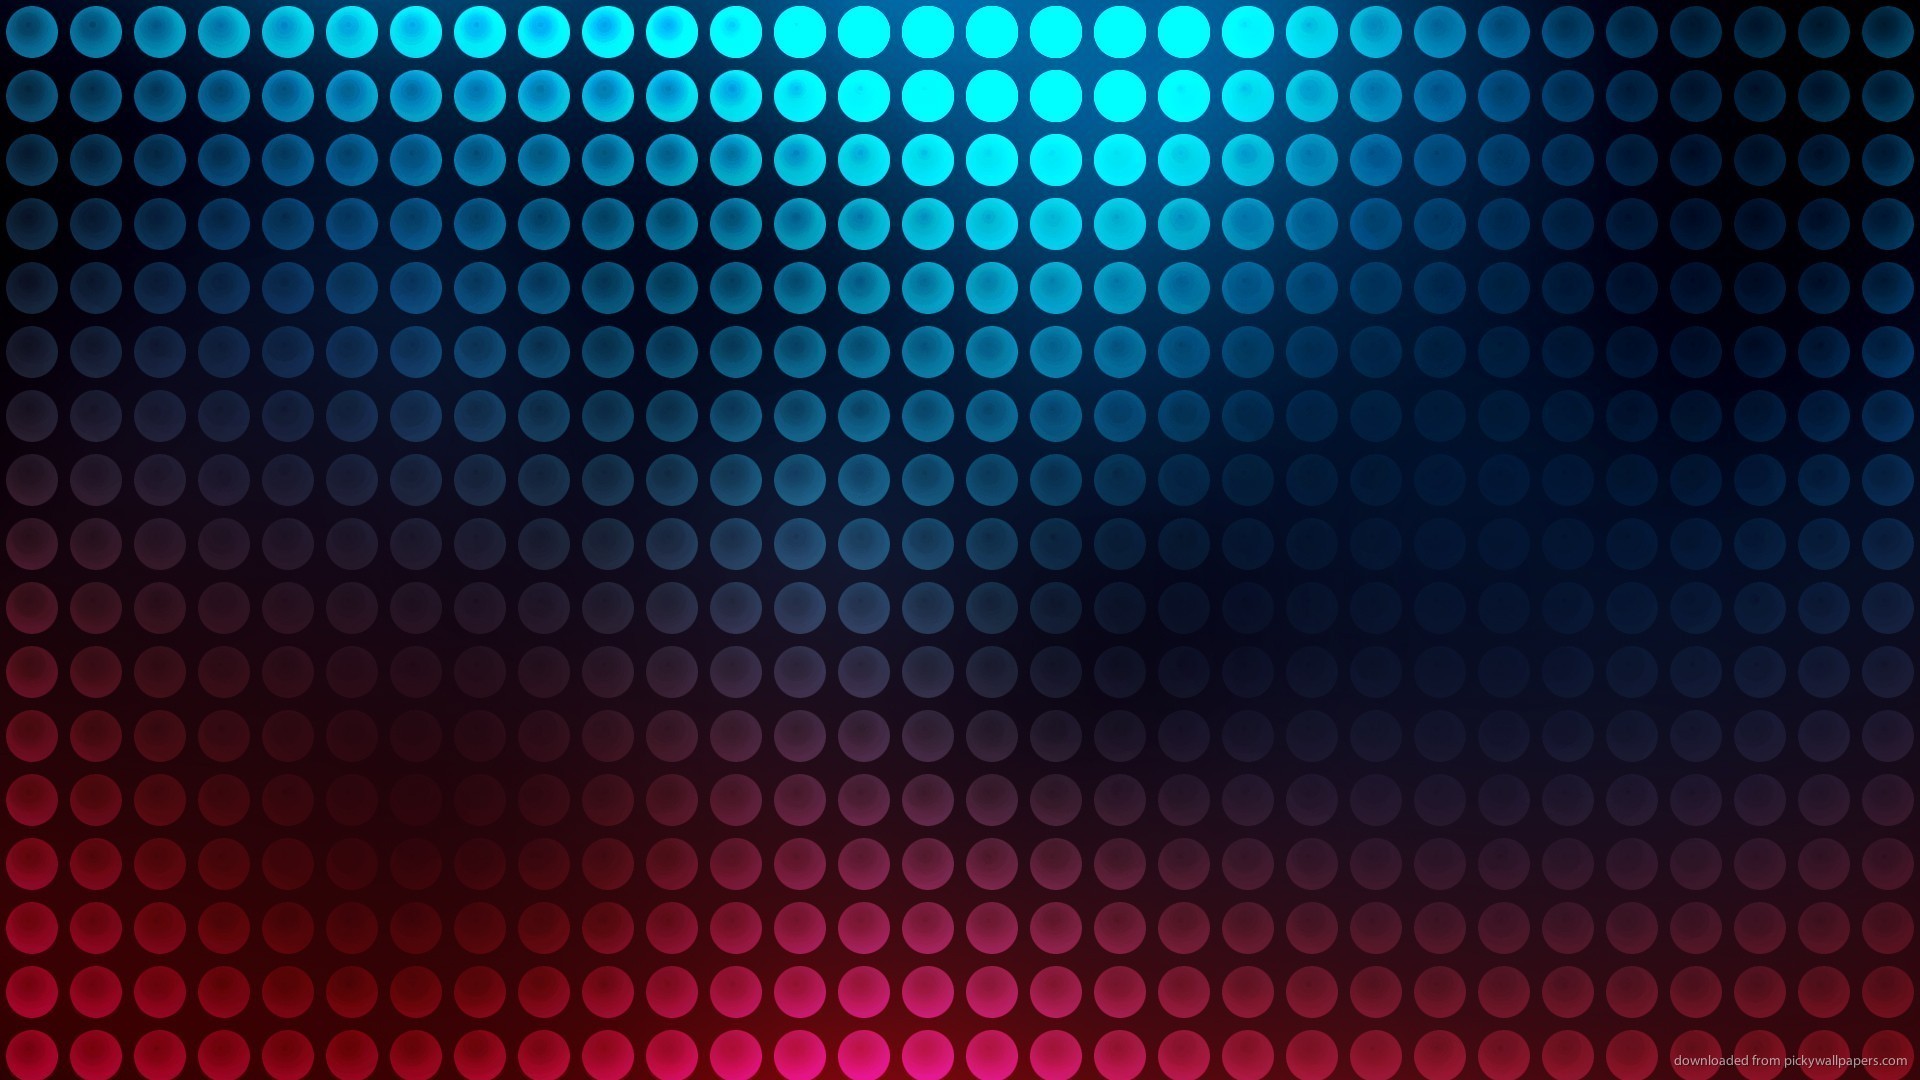 1920x1080 HD Pink and Blue Gradient Spheres wallpaper